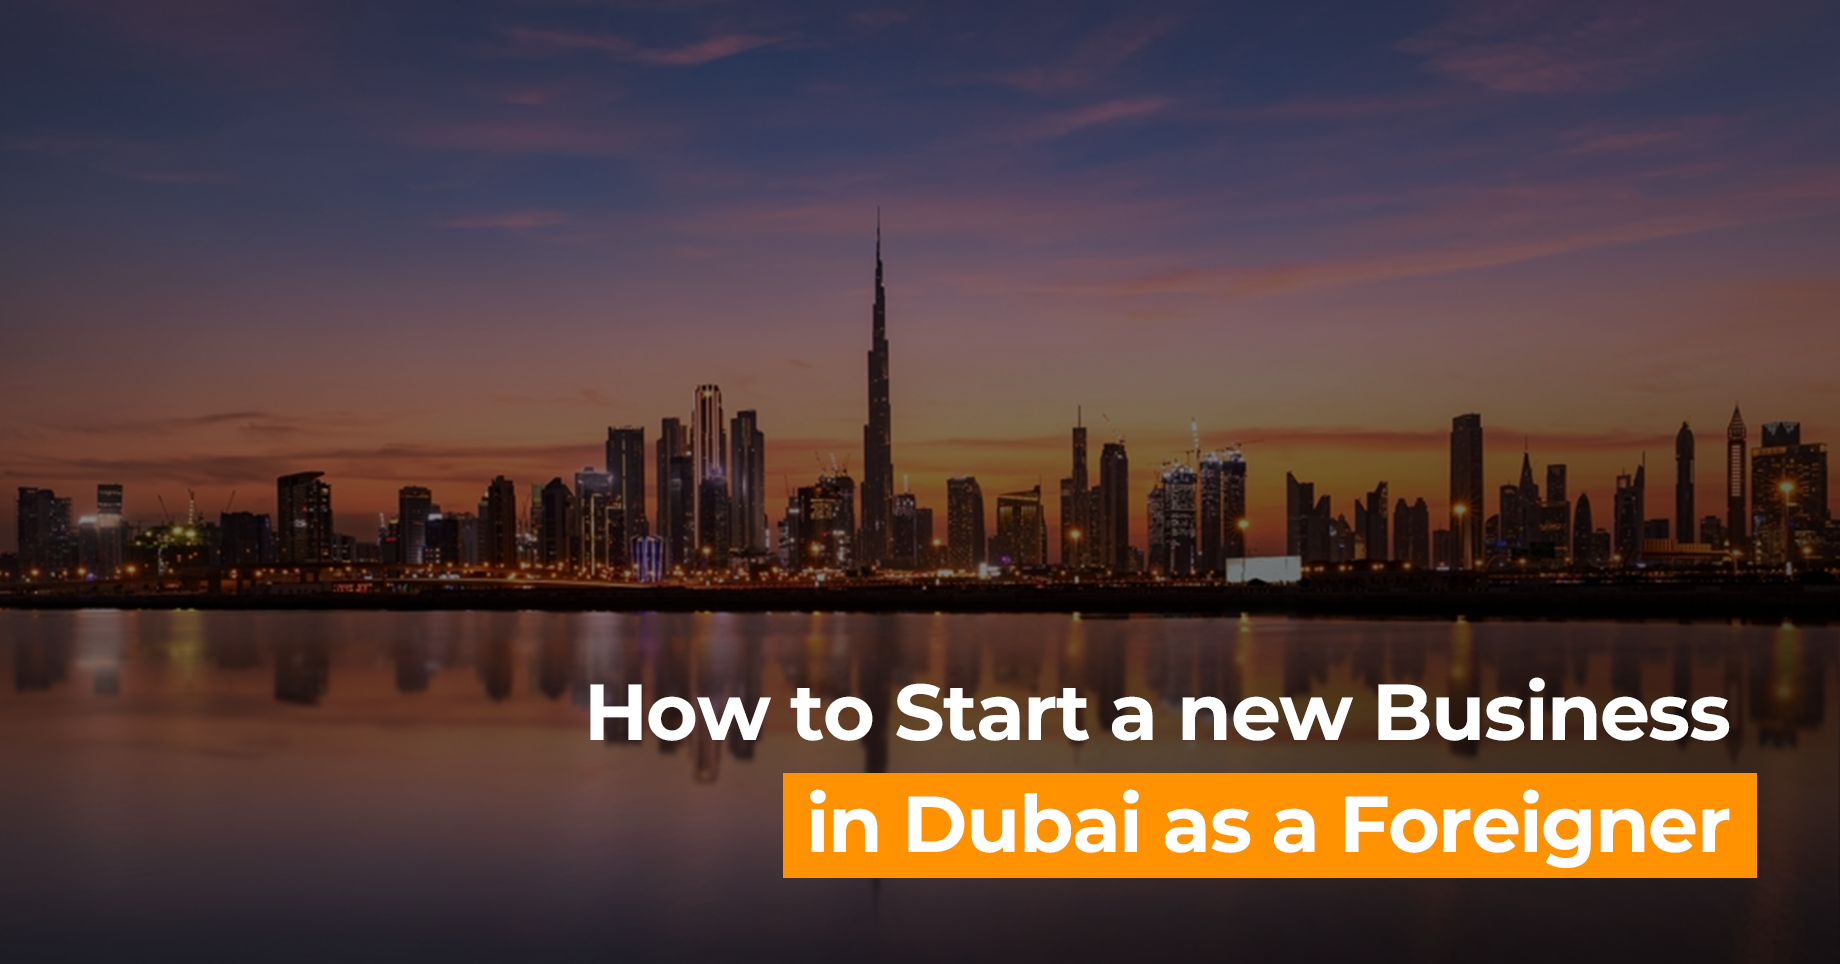 How to Start a new Business in Dubai as a Foreigner